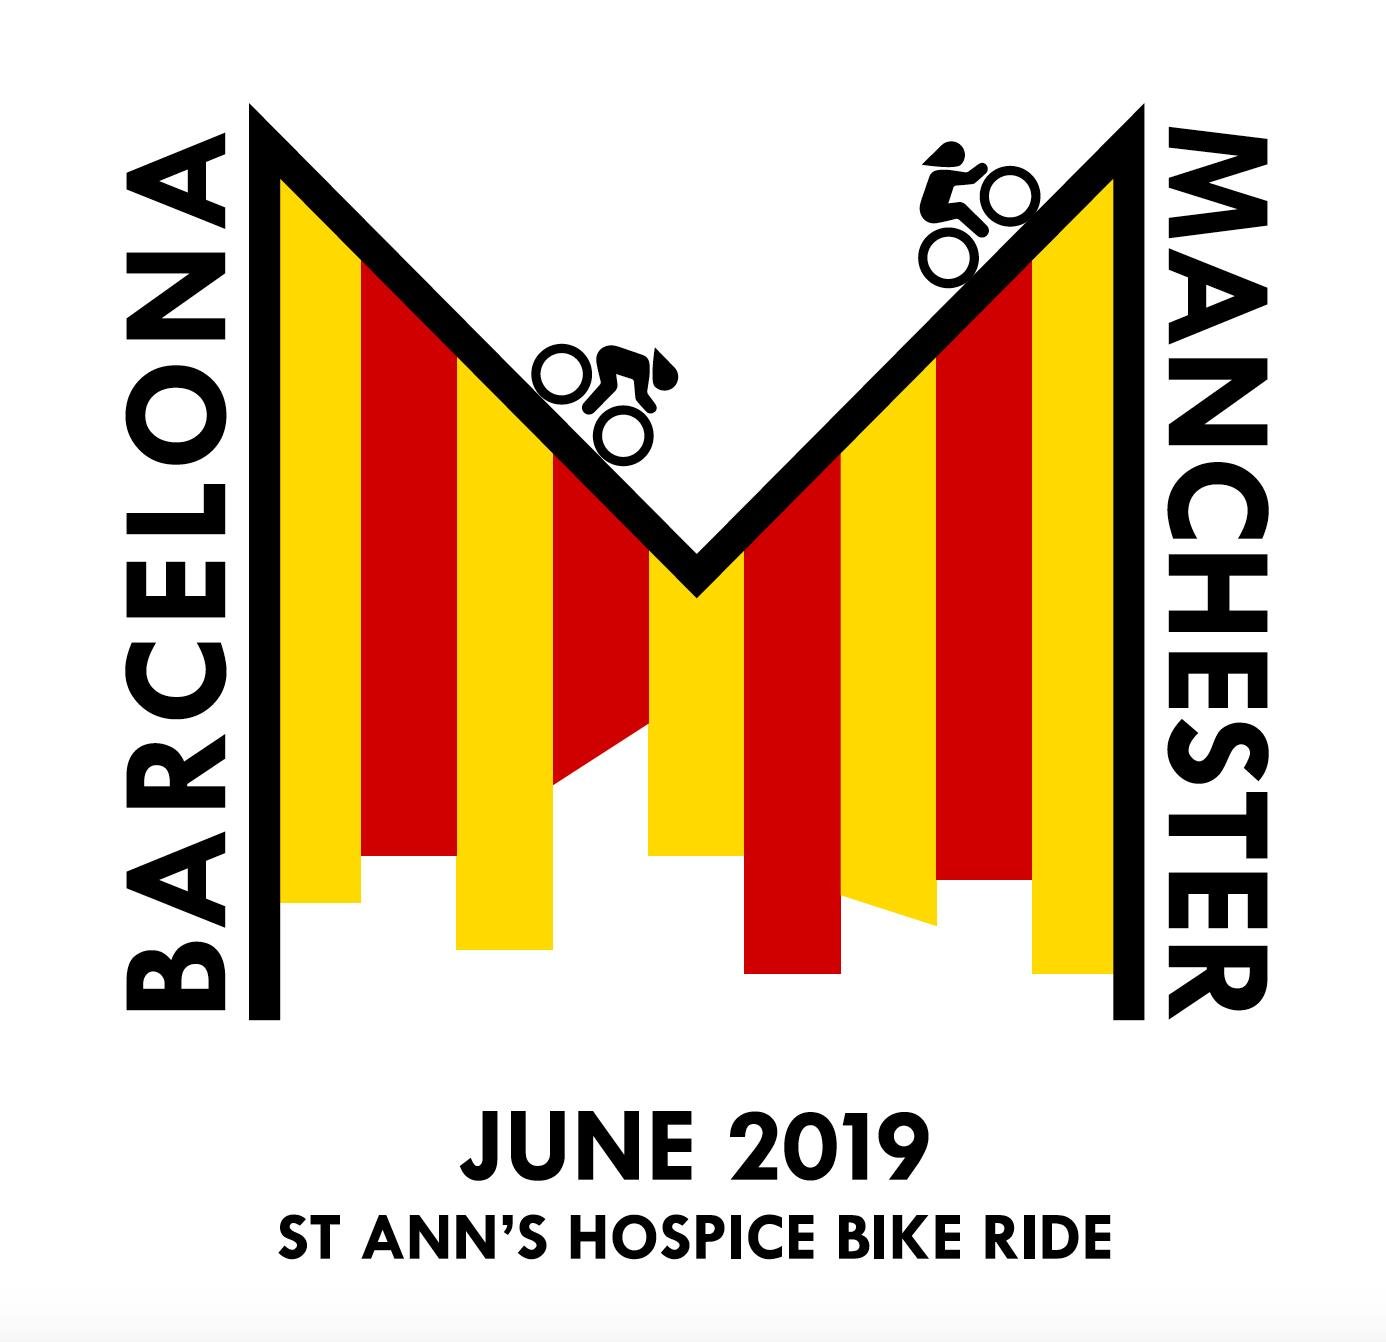 We're cycling 2,000 kms from Barcelona to Manchester in June to try and buy an ambulance in memory of Charlie Mitten for St Ann's hospice in Gtr Manchester.